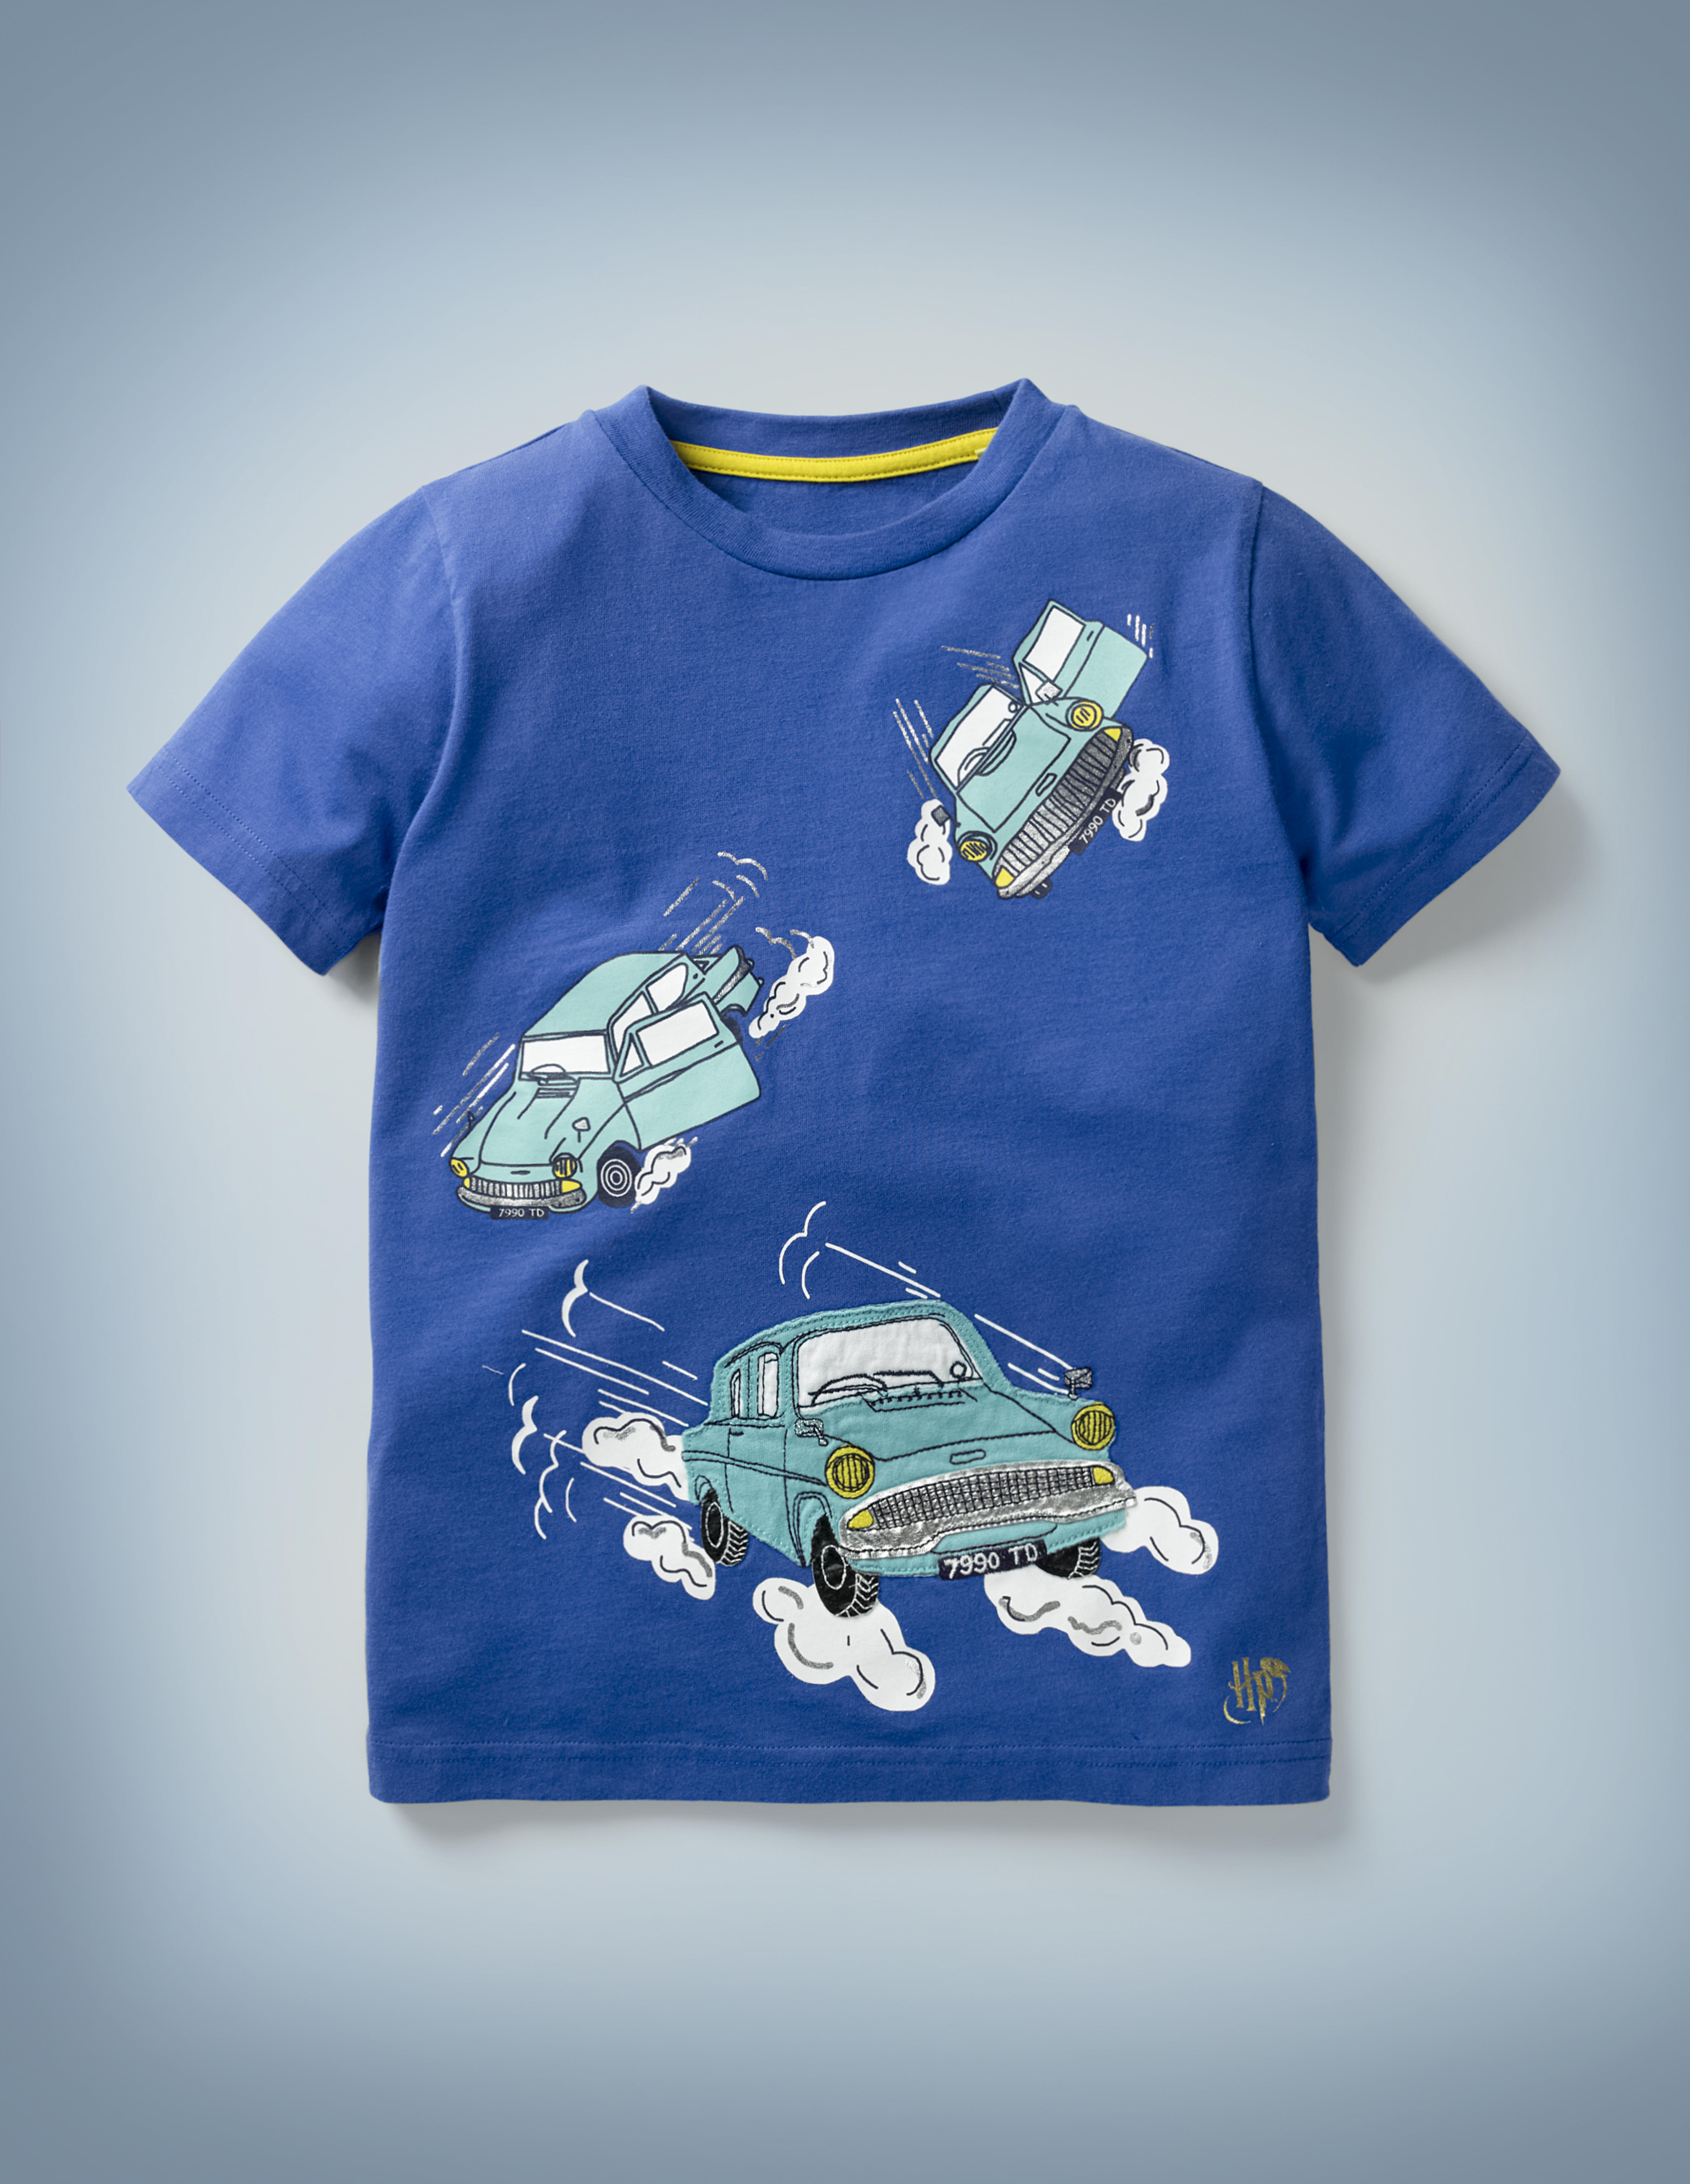 The Mini Boden Magical Transport T-shirt in blue features a fun design that includes three illustrations of Arthur Weasley’s flying Ford Anglia making its way through the sky. It retails at £20.